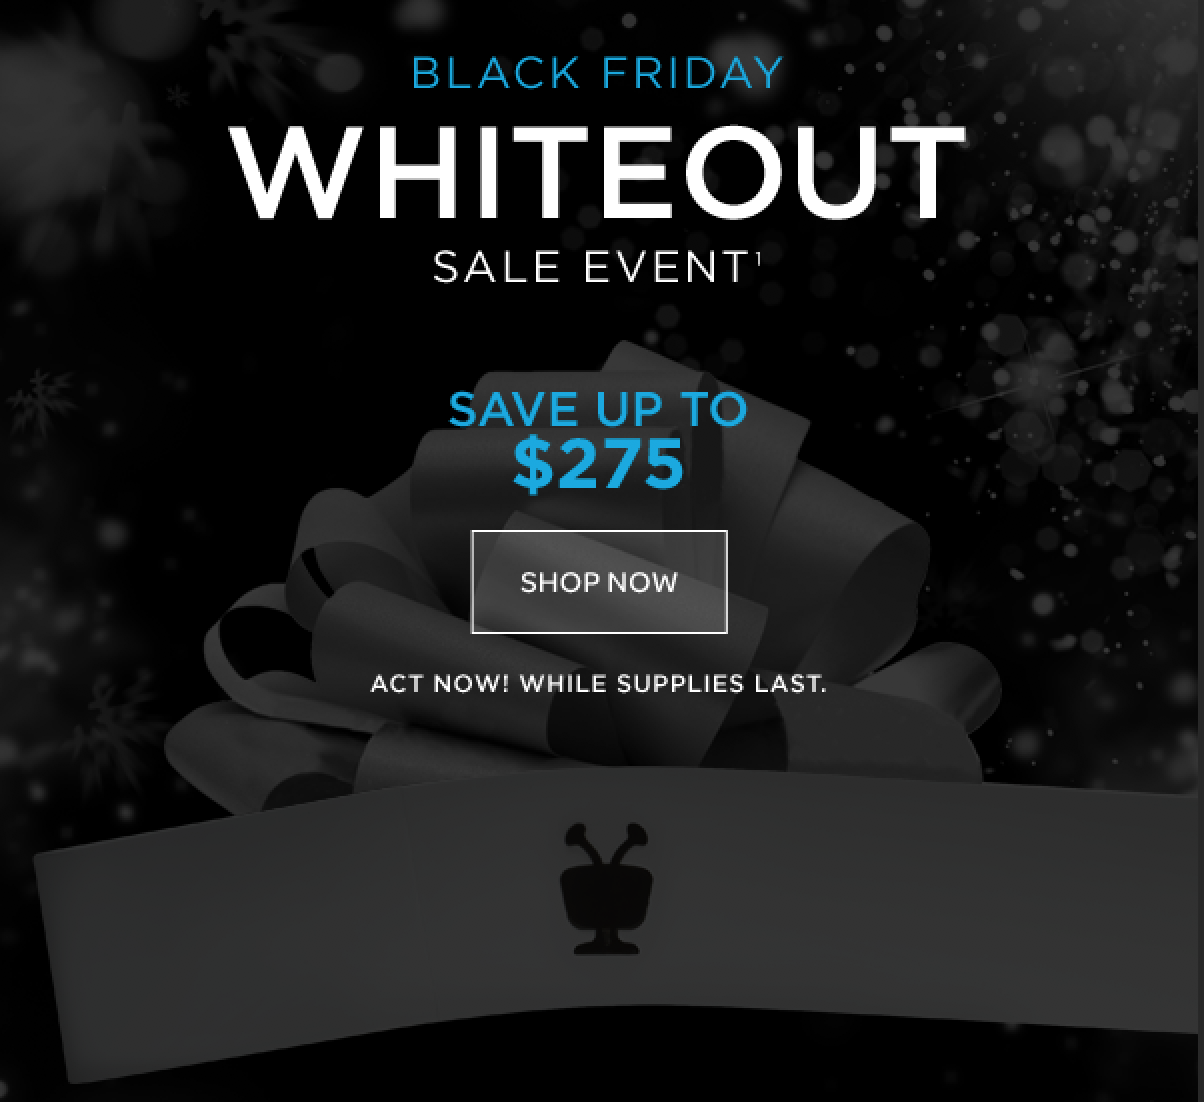 TiVo Wondering what a WHITEOUT Black Friday sale event is… Milled